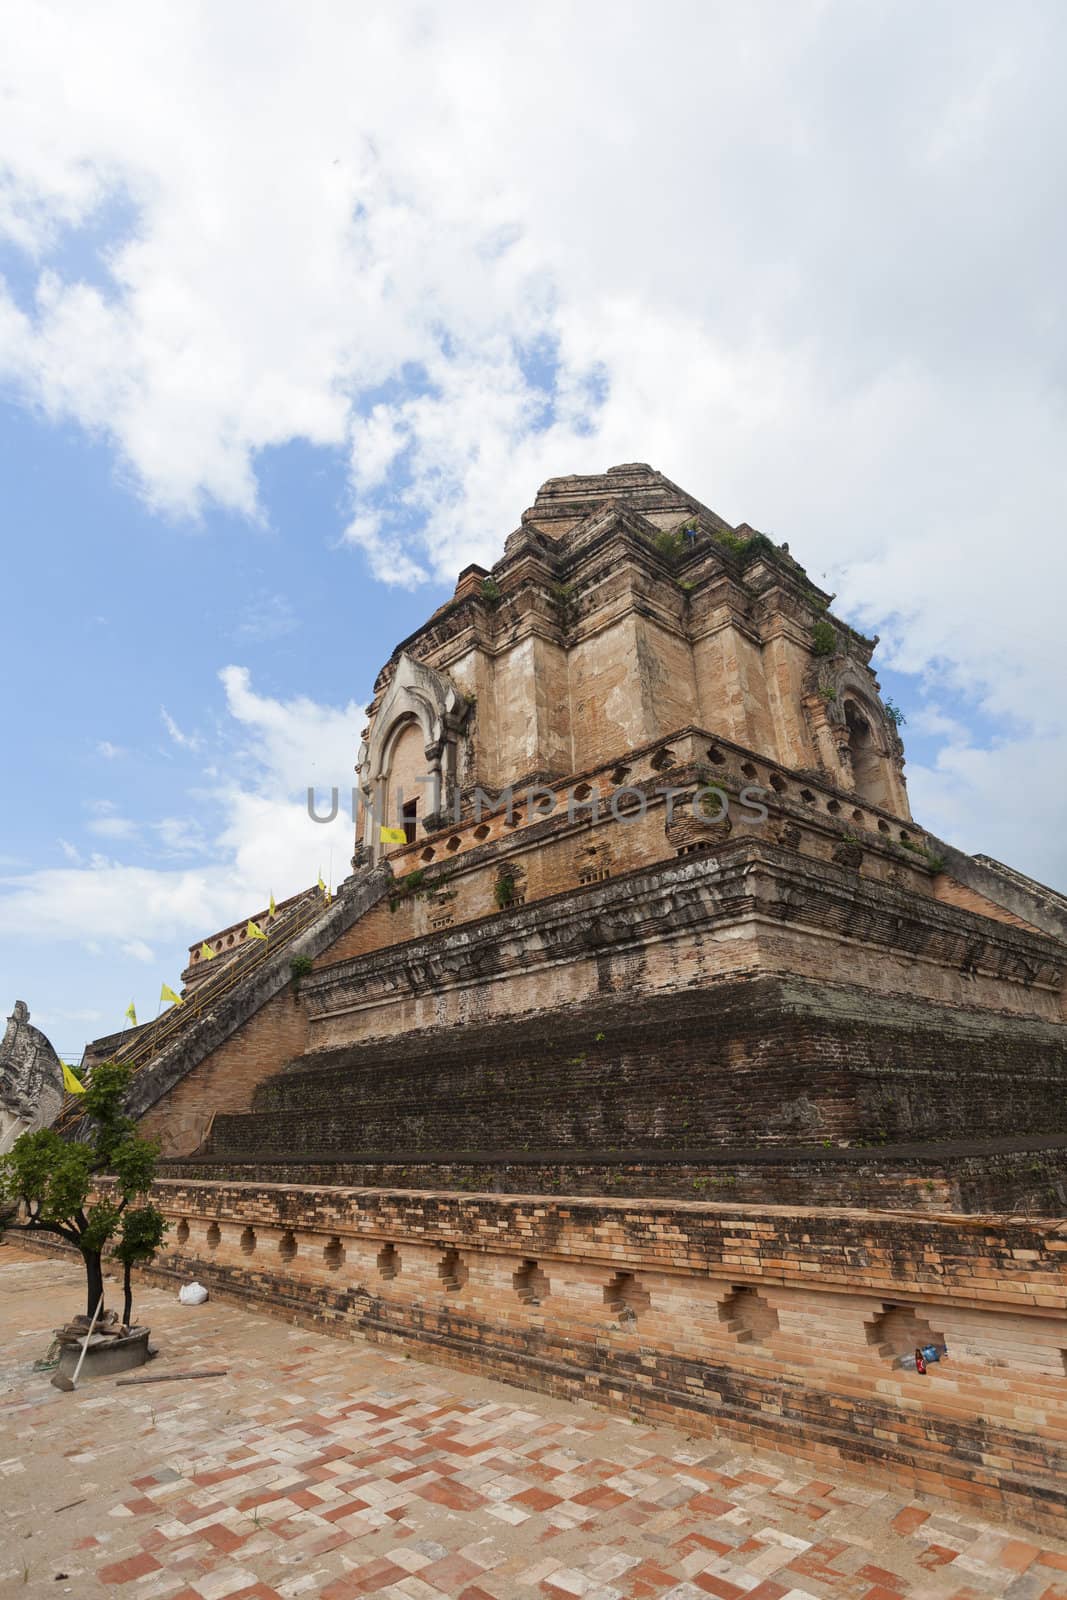 Wat Chedi Luang temple in Chiang Mai, Thailand.